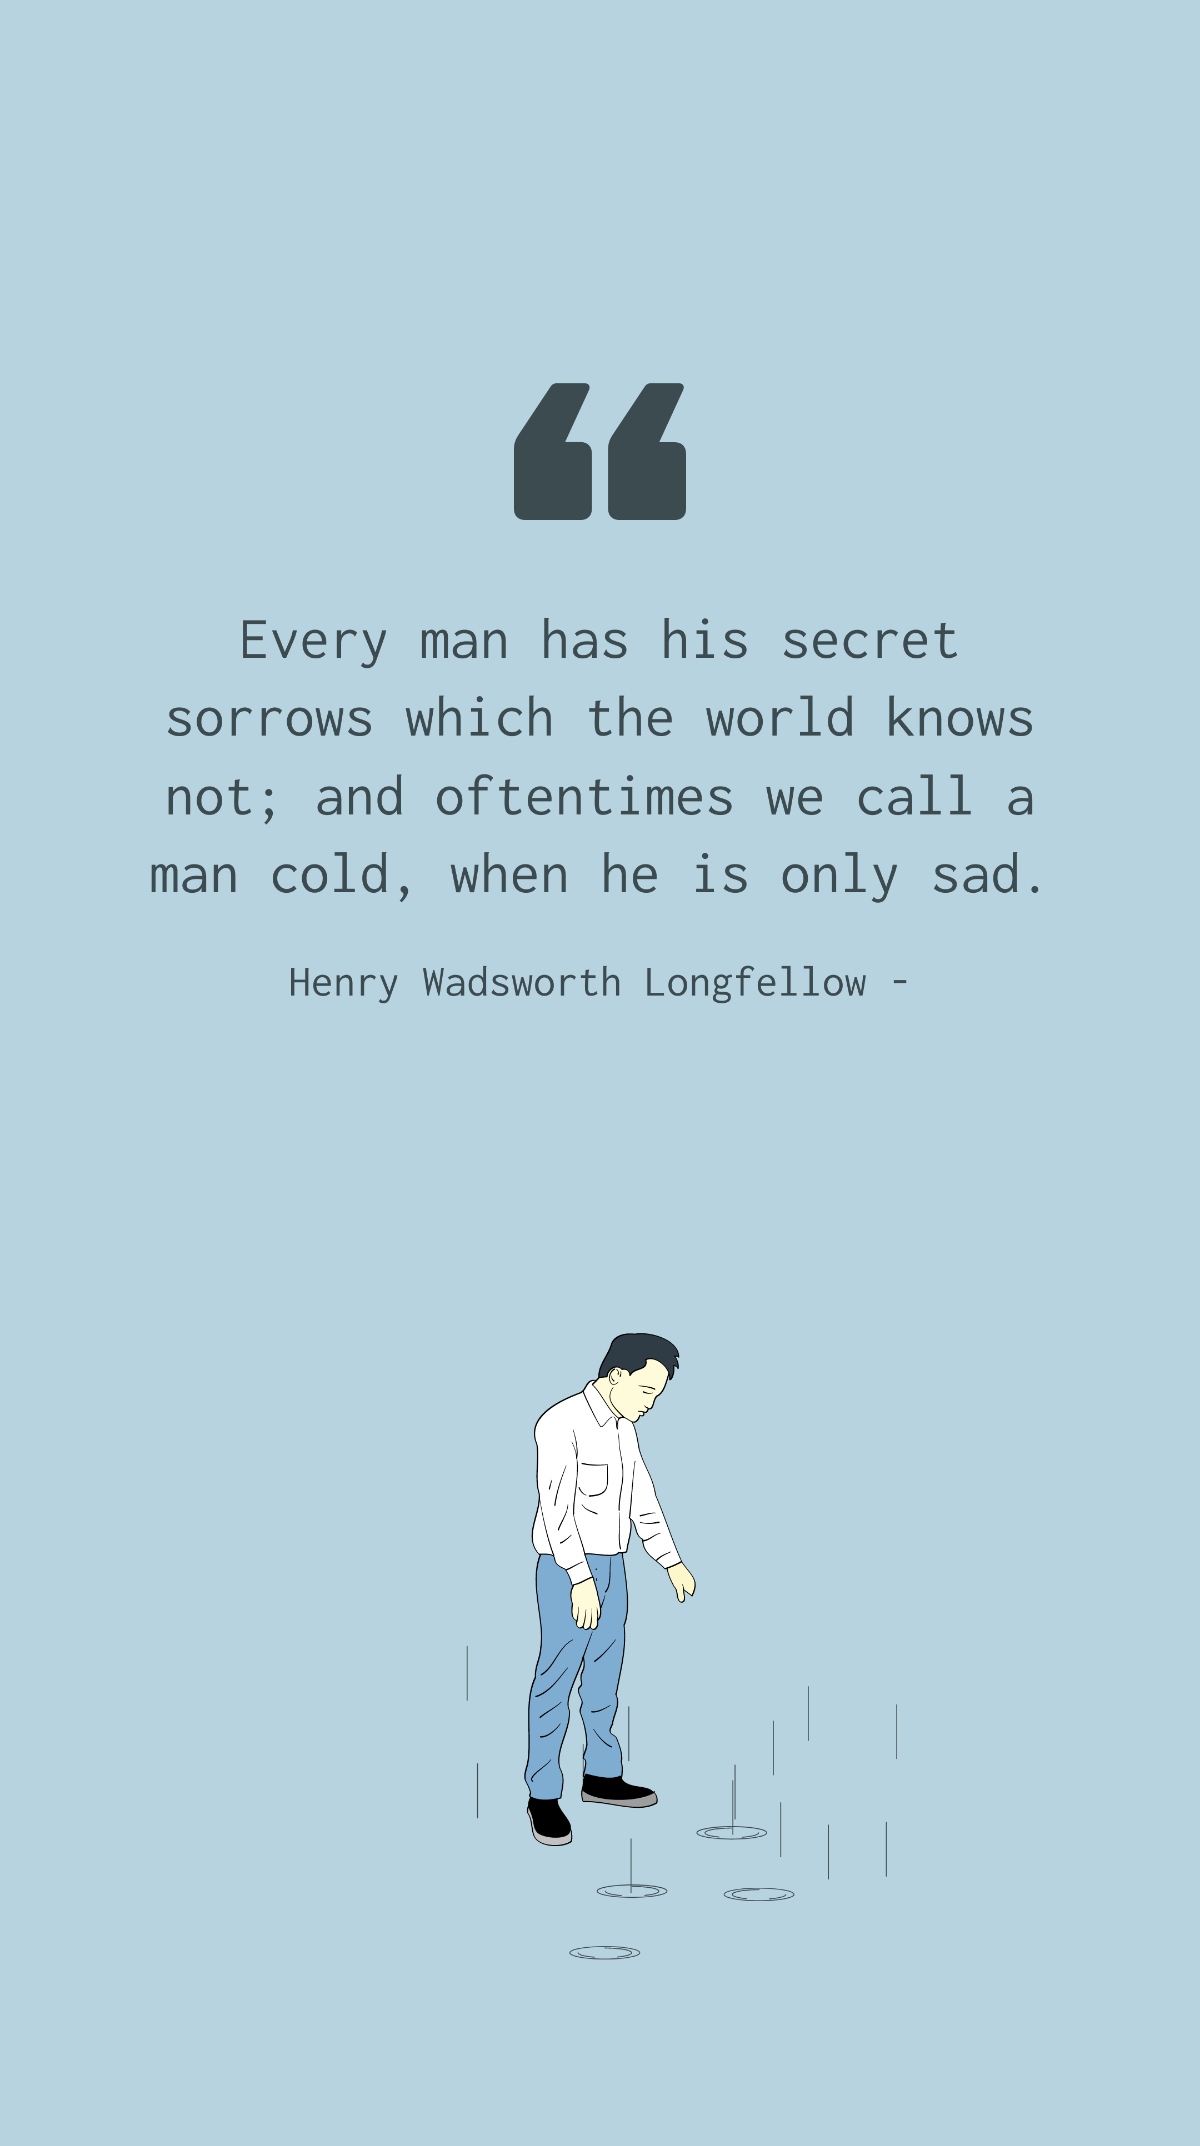 Henry Wadsworth Longfellow - Every man has his secret sorrows which the world knows not; and oftentimes we call a man cold, when he is only sad.